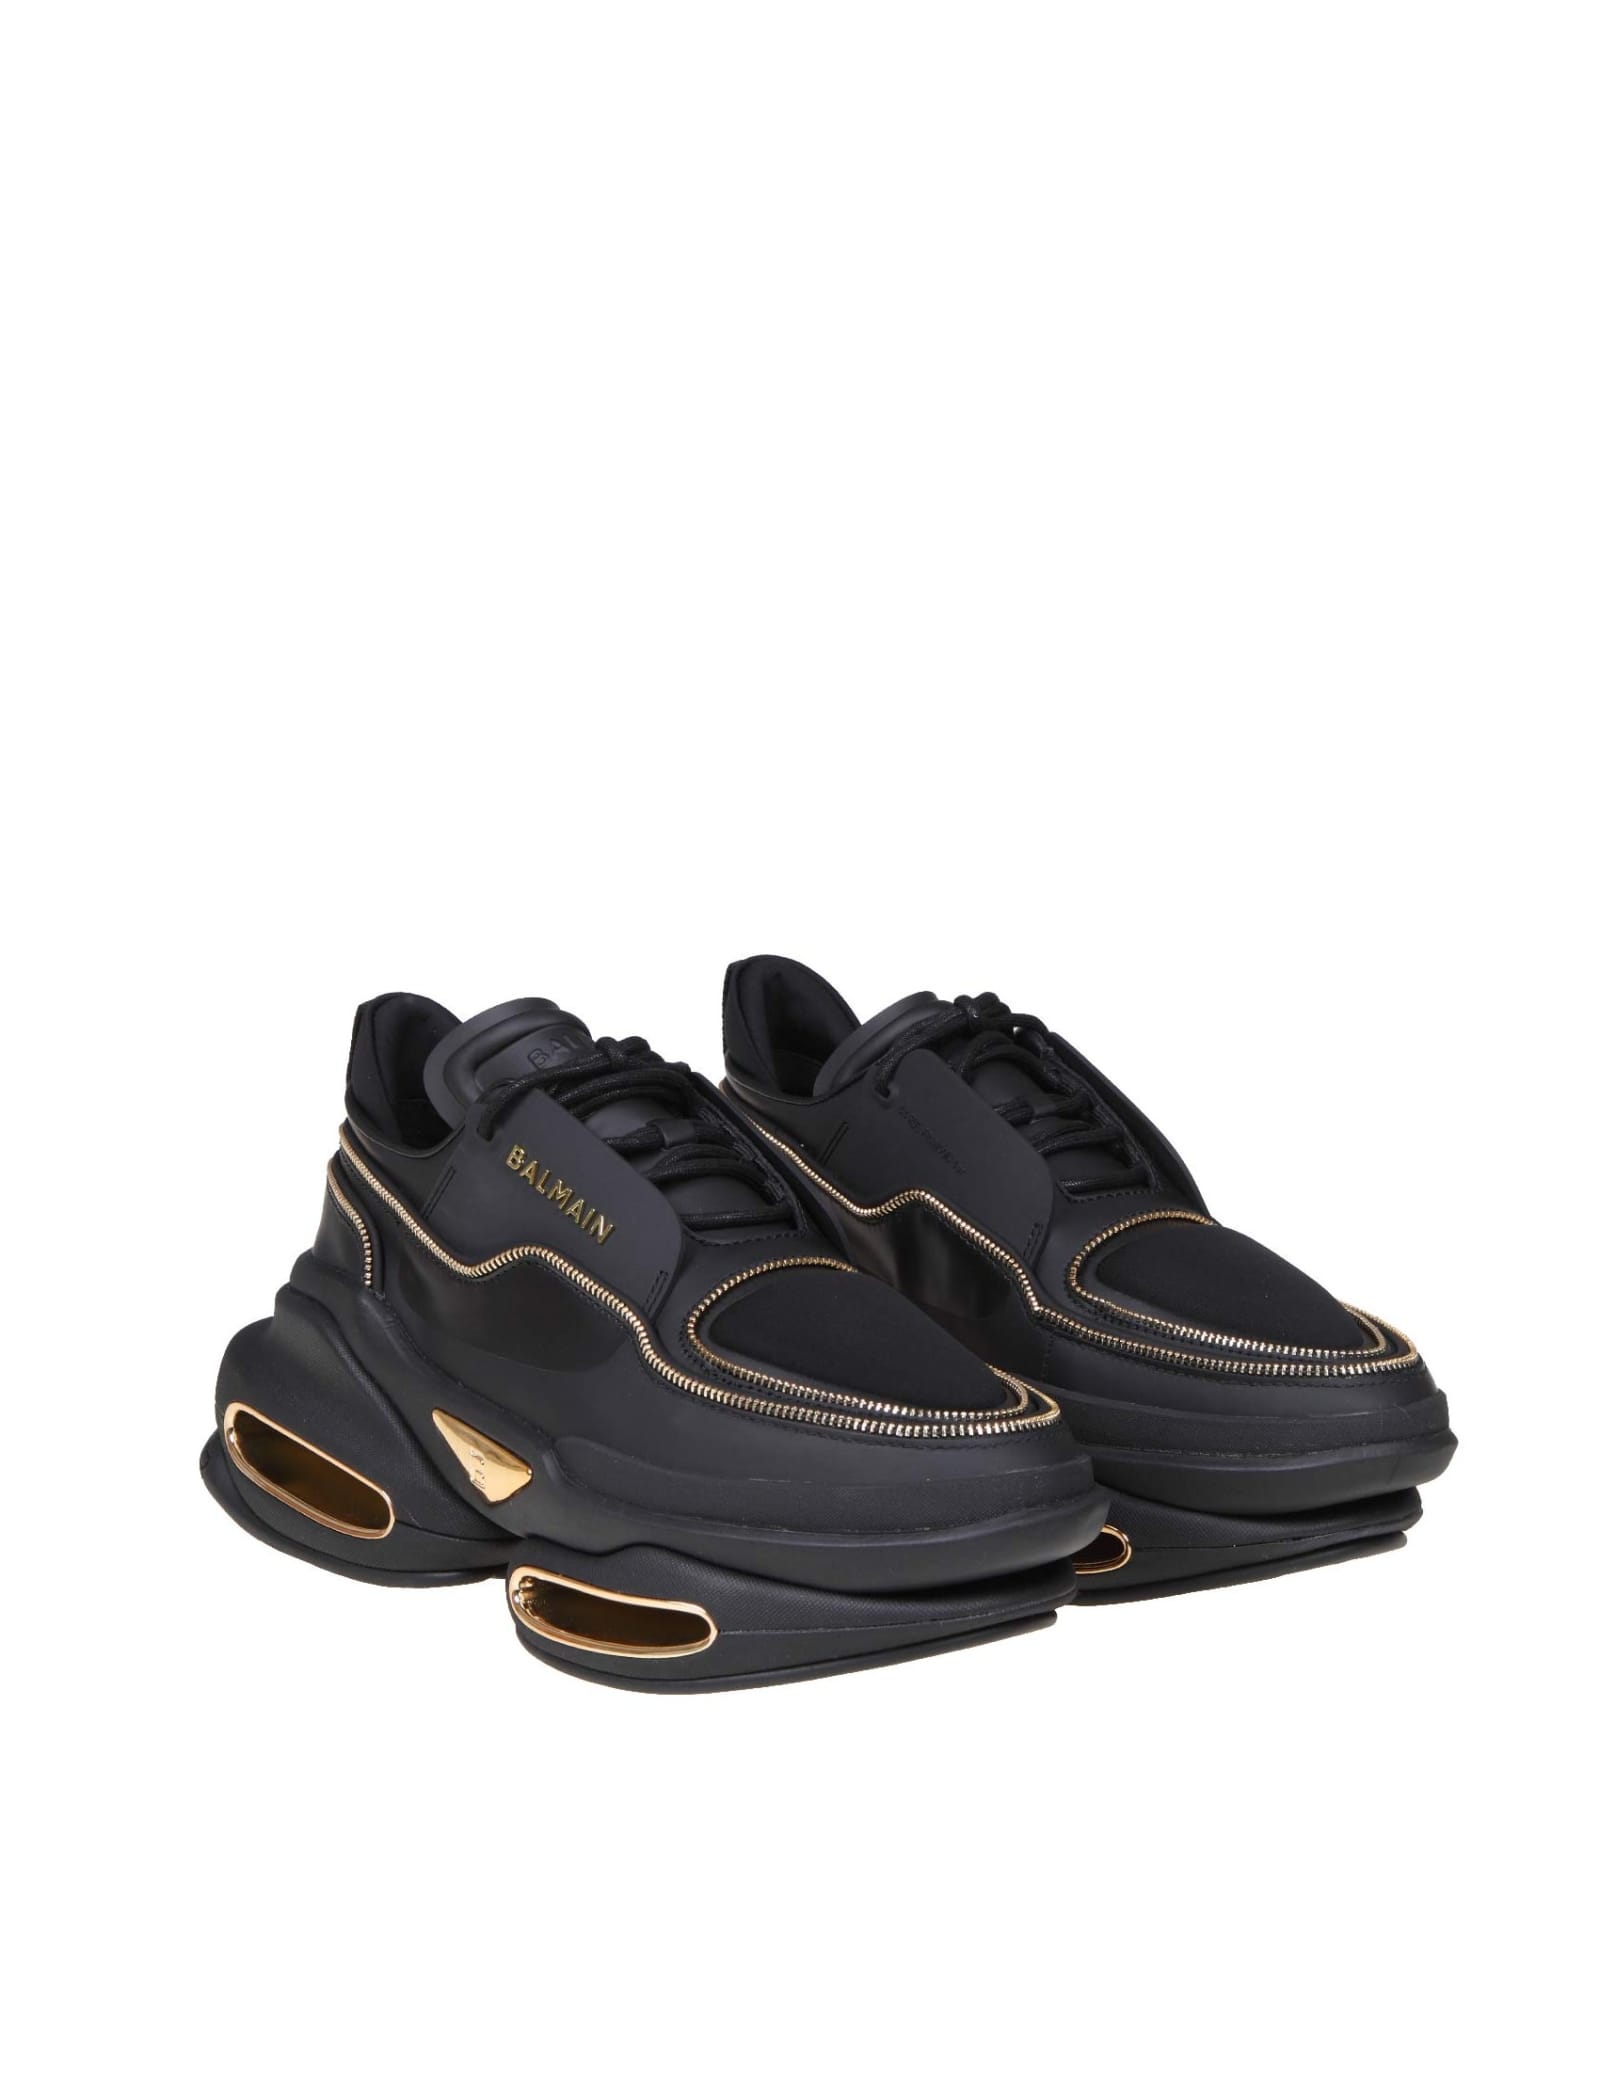 Statement Makers: Pierre Balmain's Black and Gold Sneakers